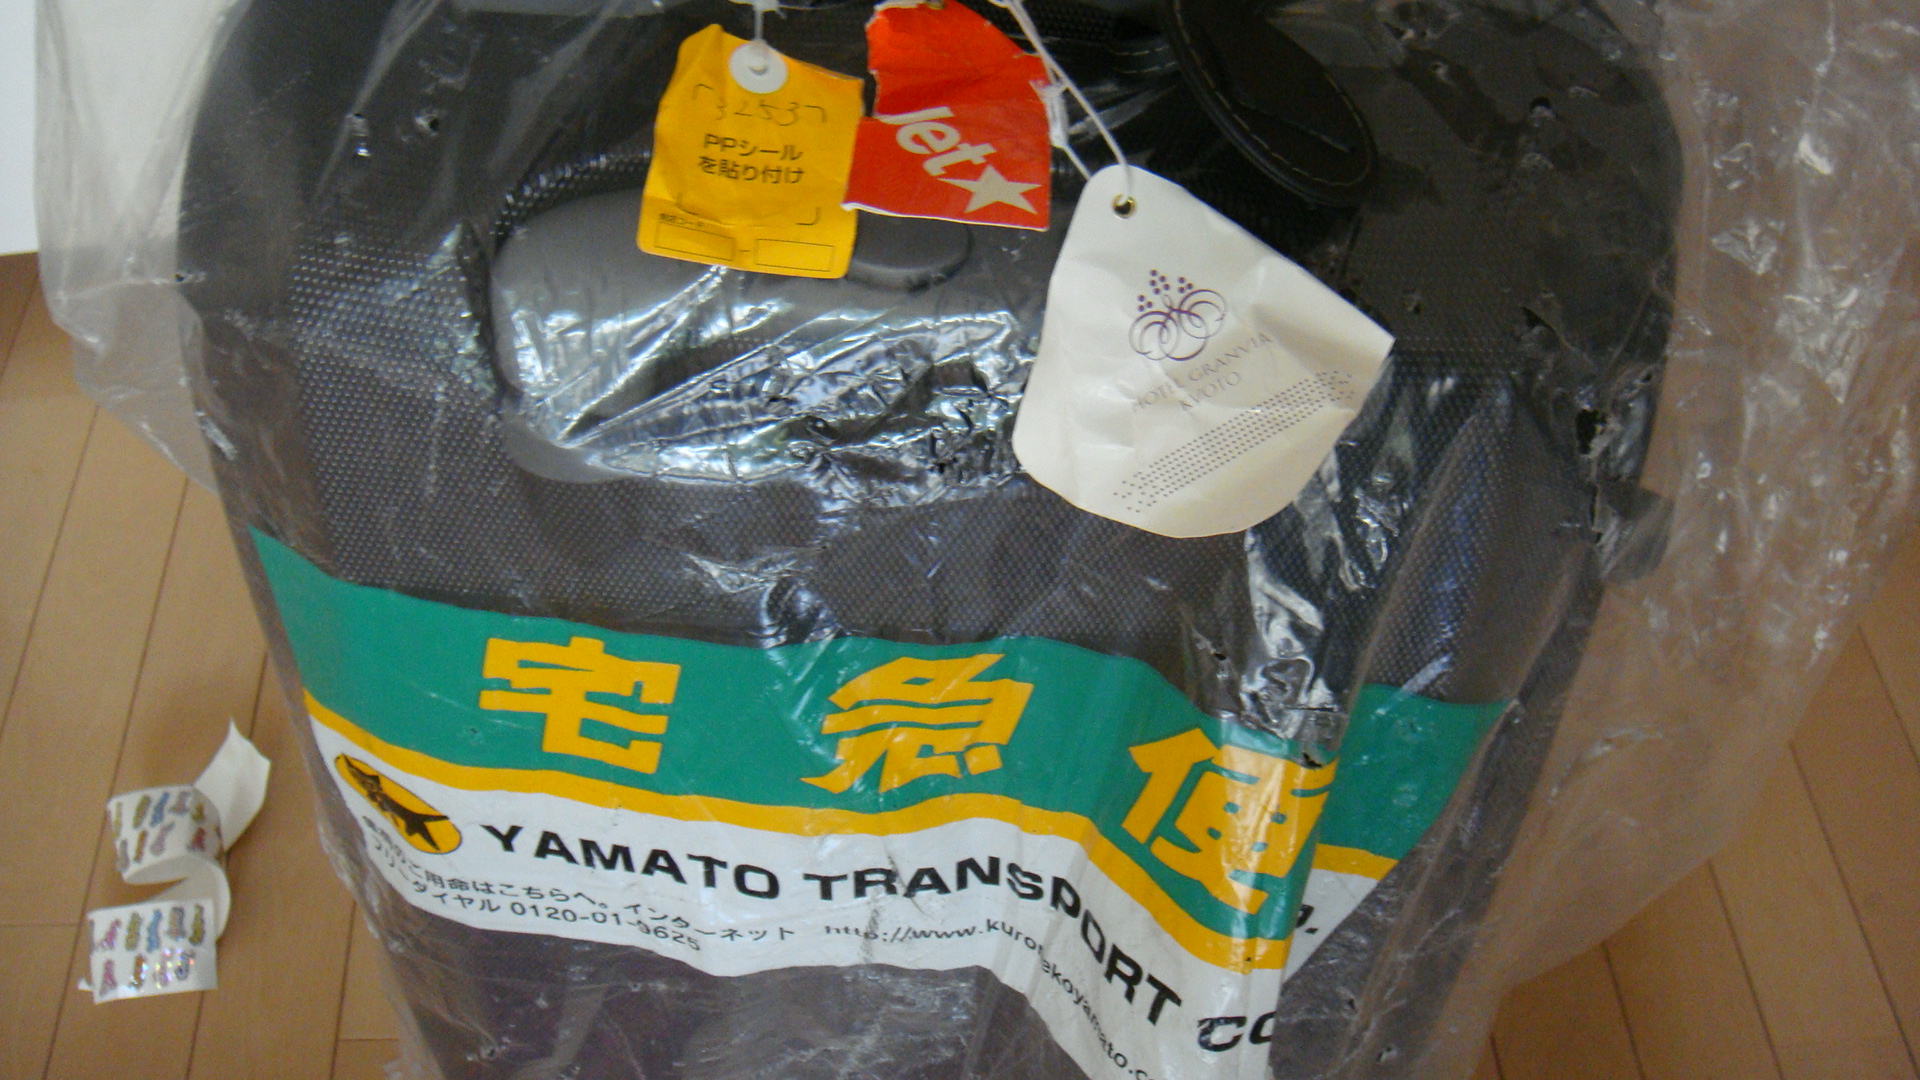 Travelling with luggage in Japan: Using Luggage Forwarding